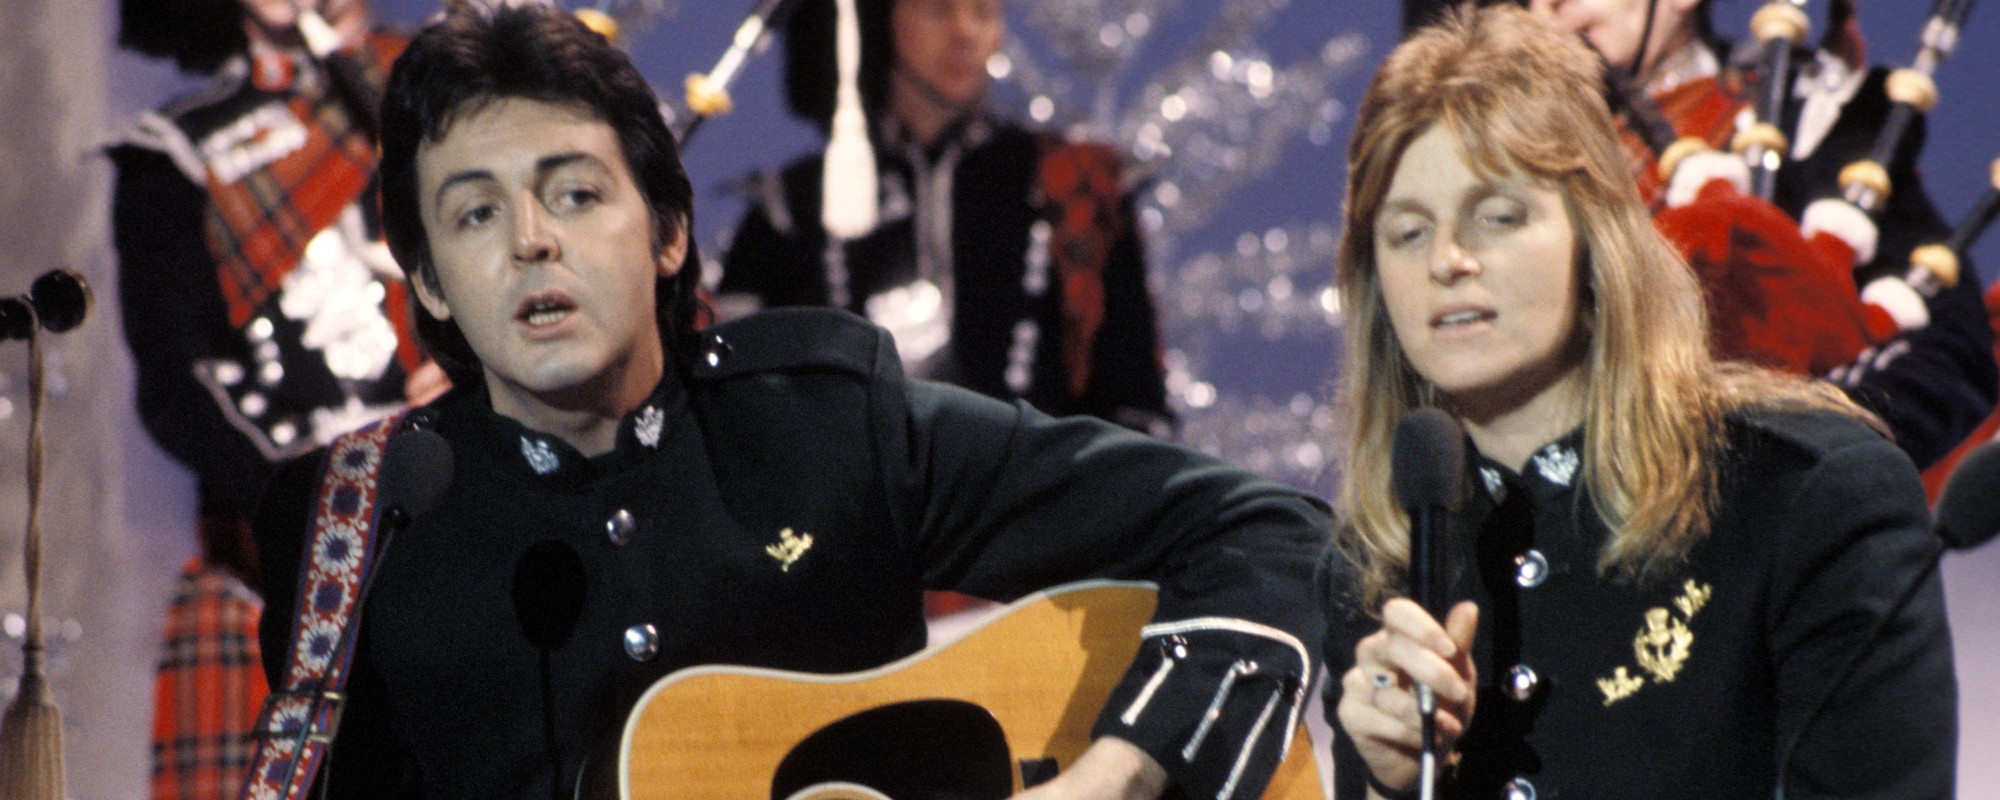 The Story and Meaning Behind “My Love,” Paul McCartney’s First Chart-Topper with Wings